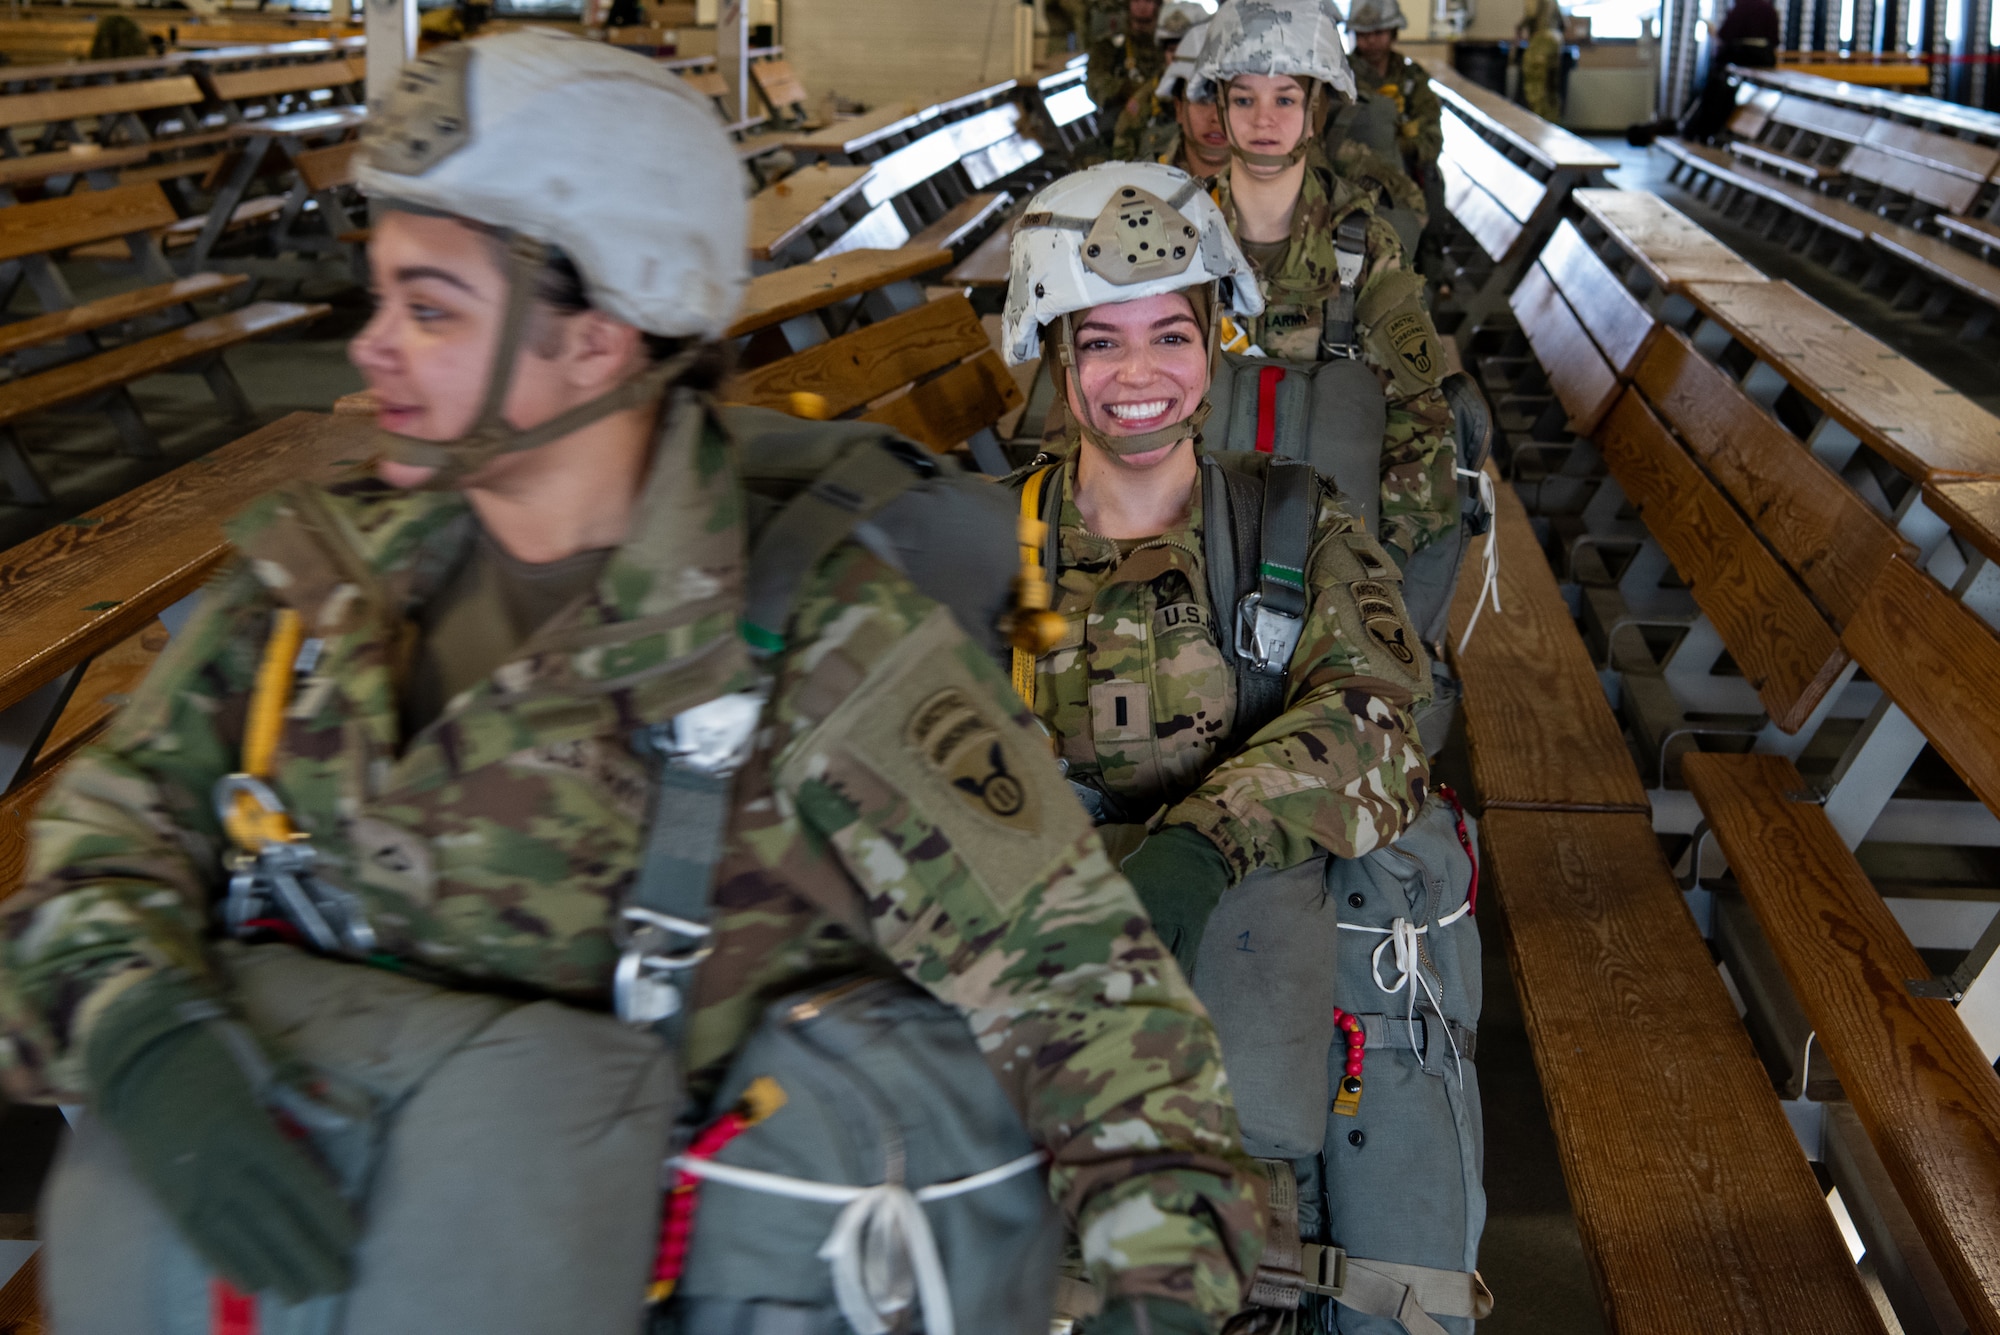 Every member of the operation including jumpers, jumpmasters and air crew were women, making it the first all-female airborne operation in division history.